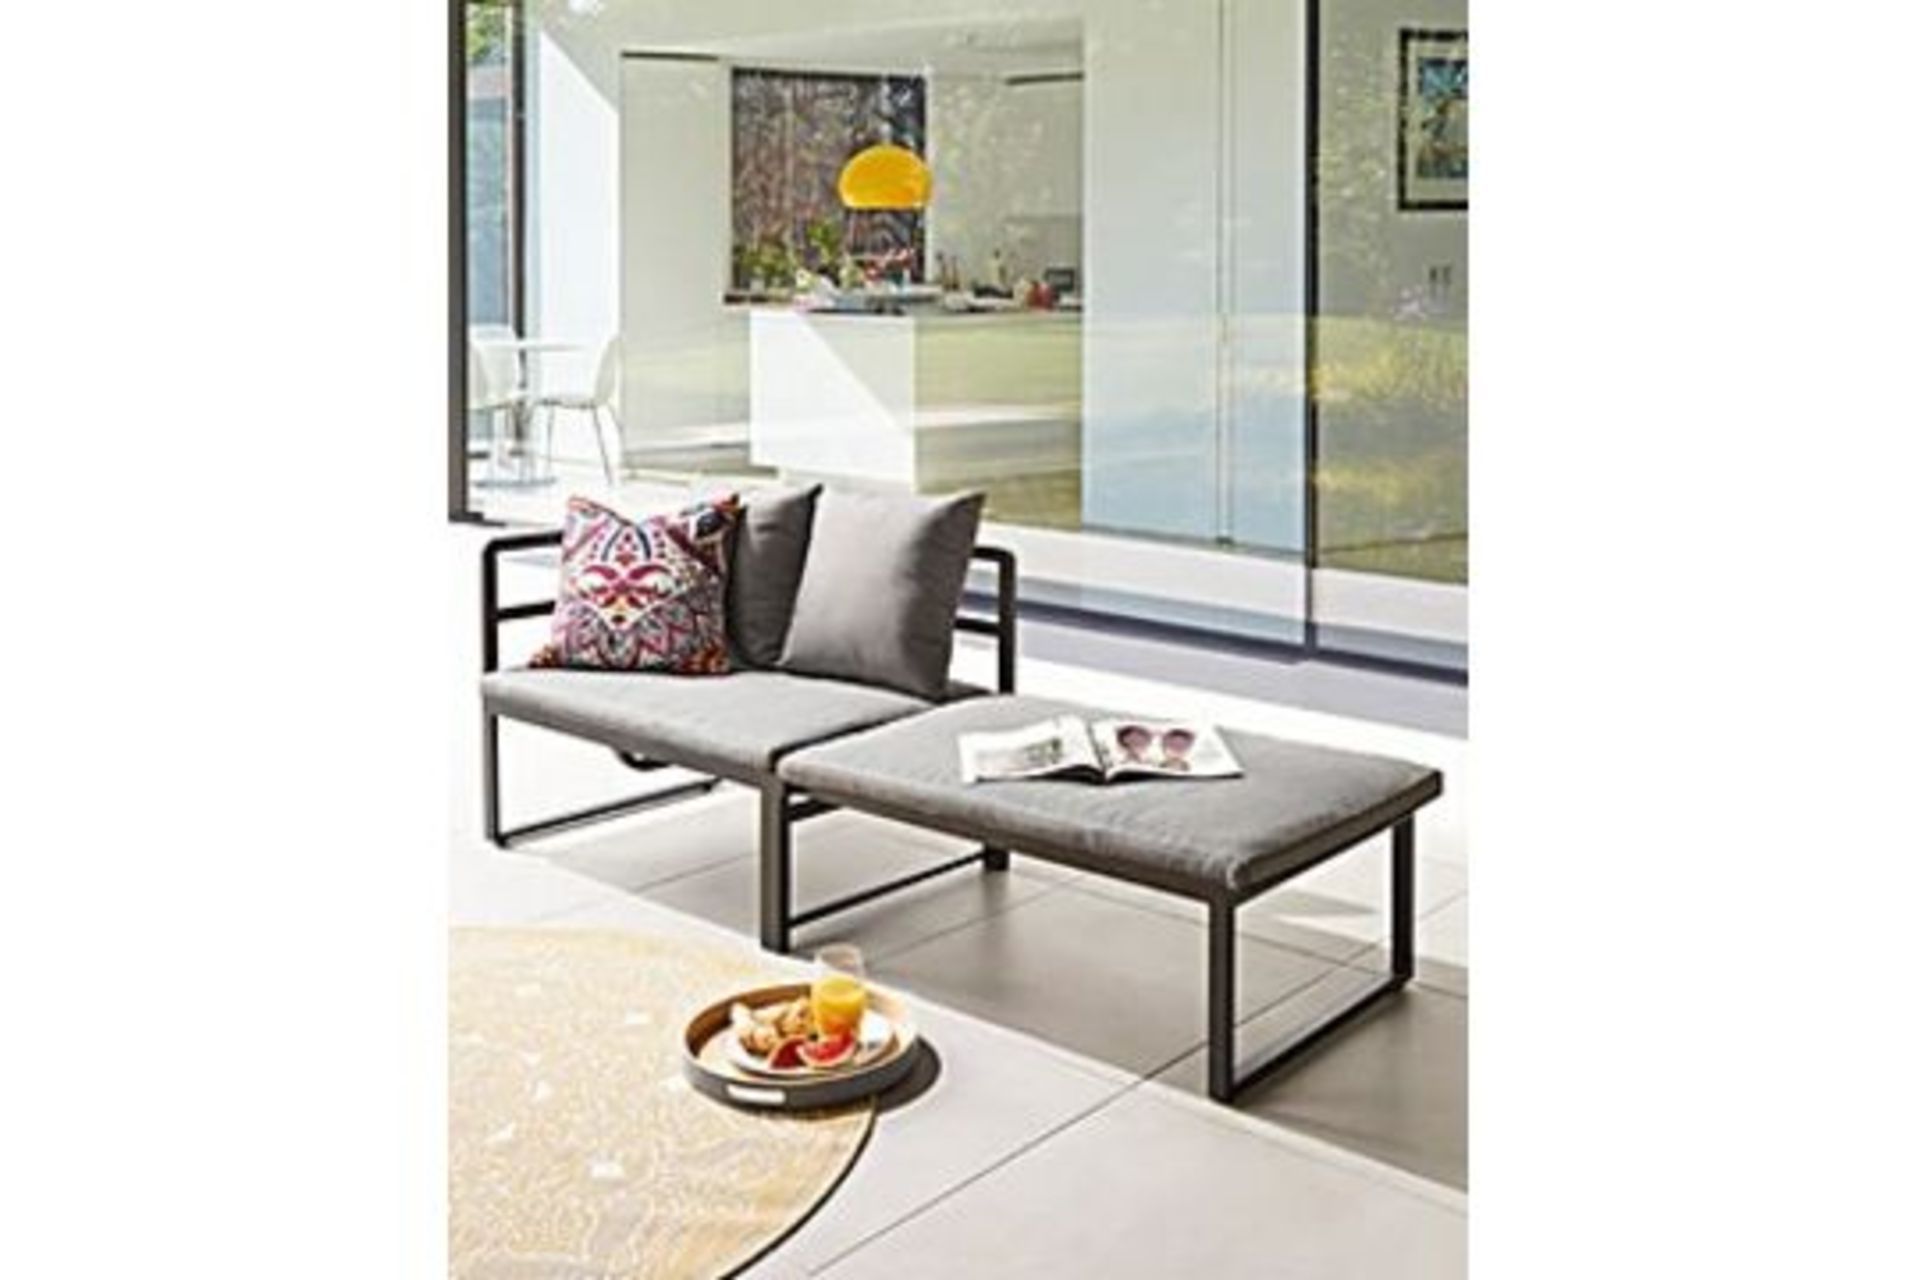 BRAND NEW LUXURY EXTENDABLE PATIO BENCH. RRP £225. This contemporary extendable bench is a multi